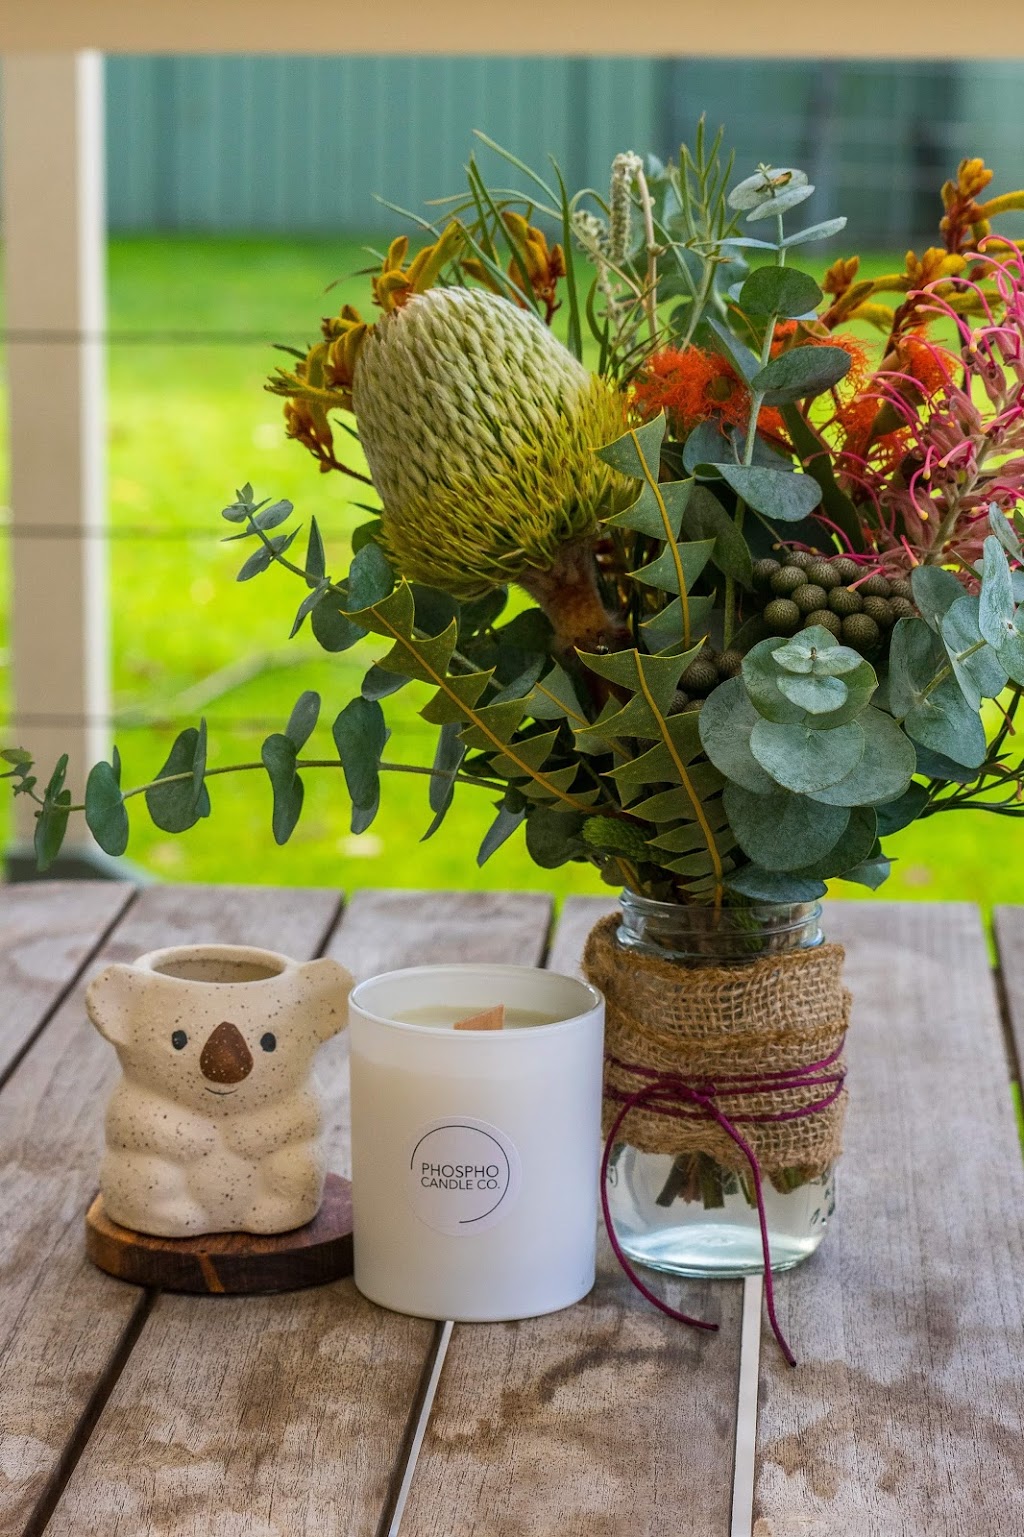 Phospho Candle Co. | home goods store | Captain Cook Dr, Kurnell NSW 2231, Australia | 0433783263 OR +61 433 783 263